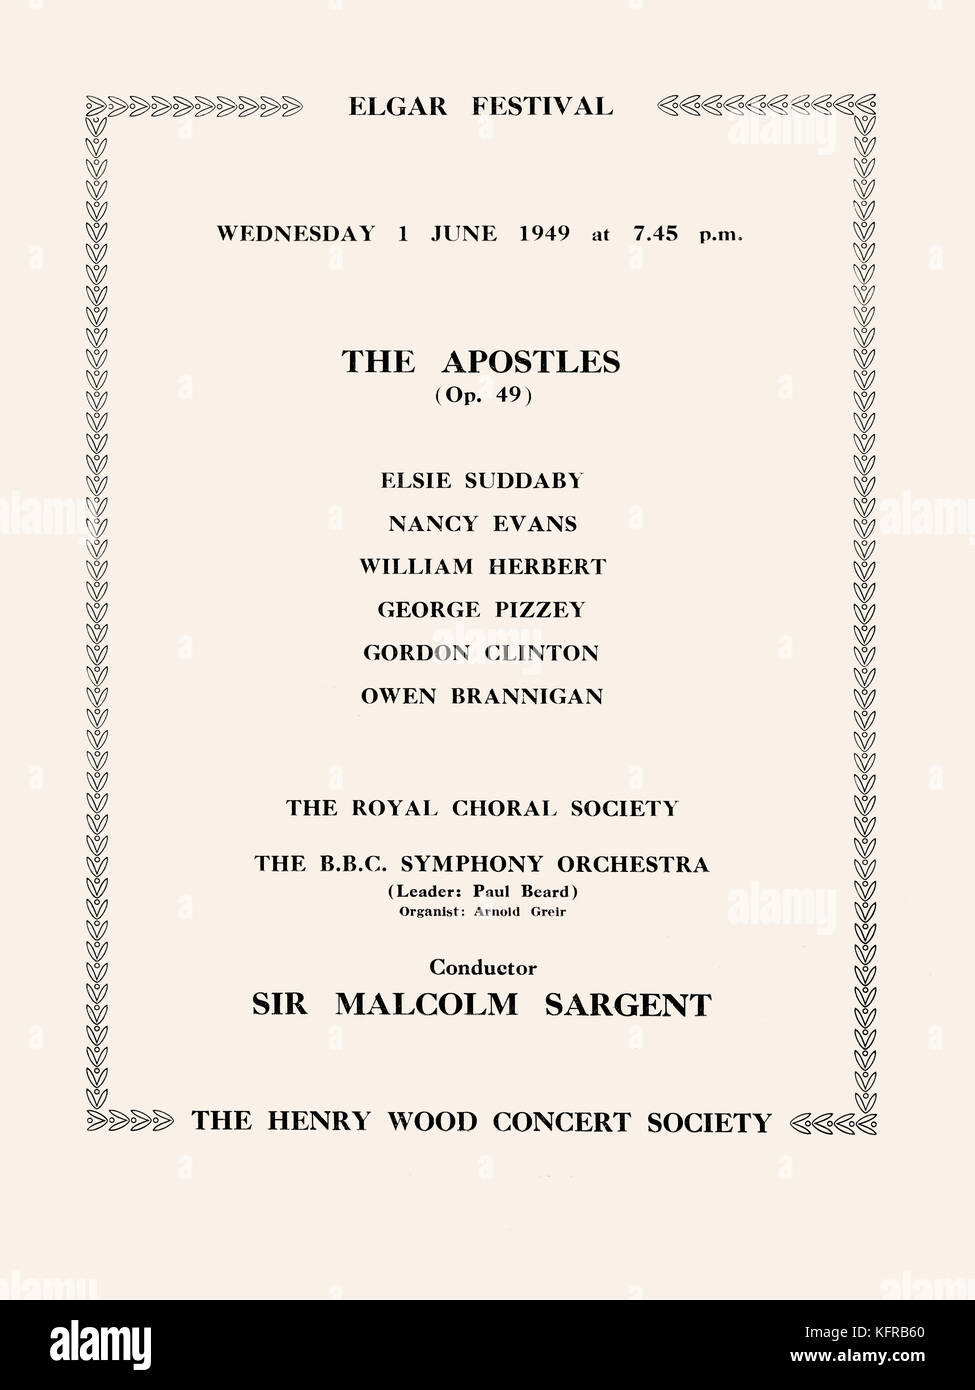 Edward Elgar's 'The Apostles performed at Elgar Festival at the Royal Albert Hall 30 May - 15 June 1949, Henry Wood Concert Society. With singers Elsie Suddaby, Owen Brannigan, Nancy Evans, William Herbert, George Pizzey, Gordon Clinton. Conducted by Sir Malcolm Sargent.    English composer, 2 June 1857 -23 February 1934. Stock Photo